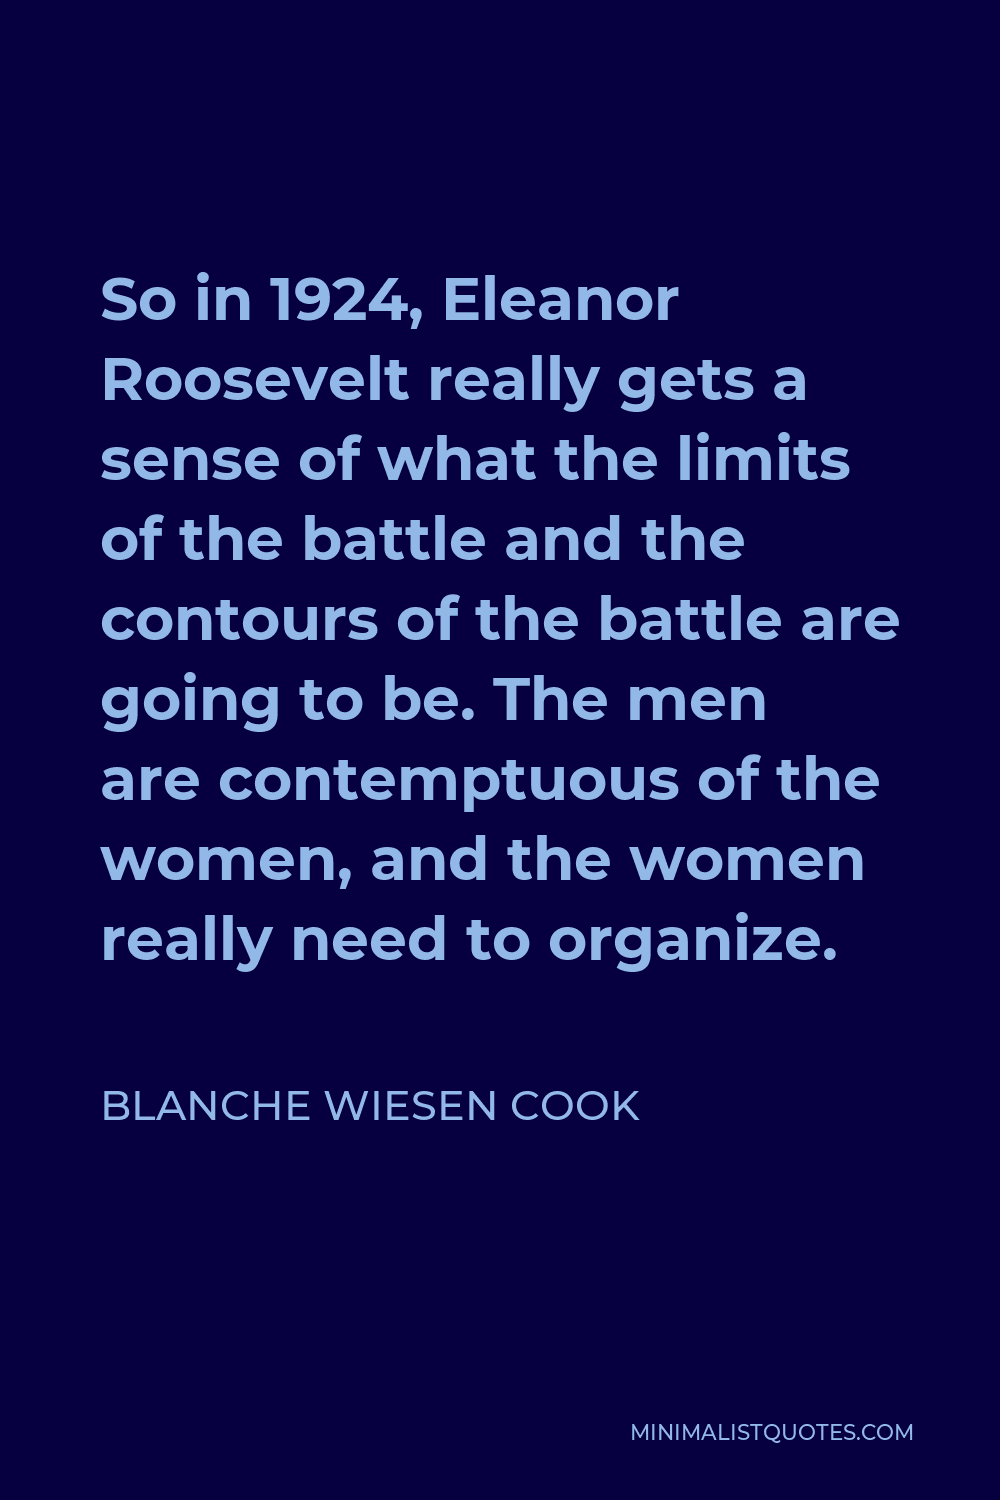 Blanche Wiesen Cook Quote - So in 1924, Eleanor Roosevelt really gets a sense of what the limits of the battle and the contours of the battle are going to be. The men are contemptuous of the women, and the women really need to organize.